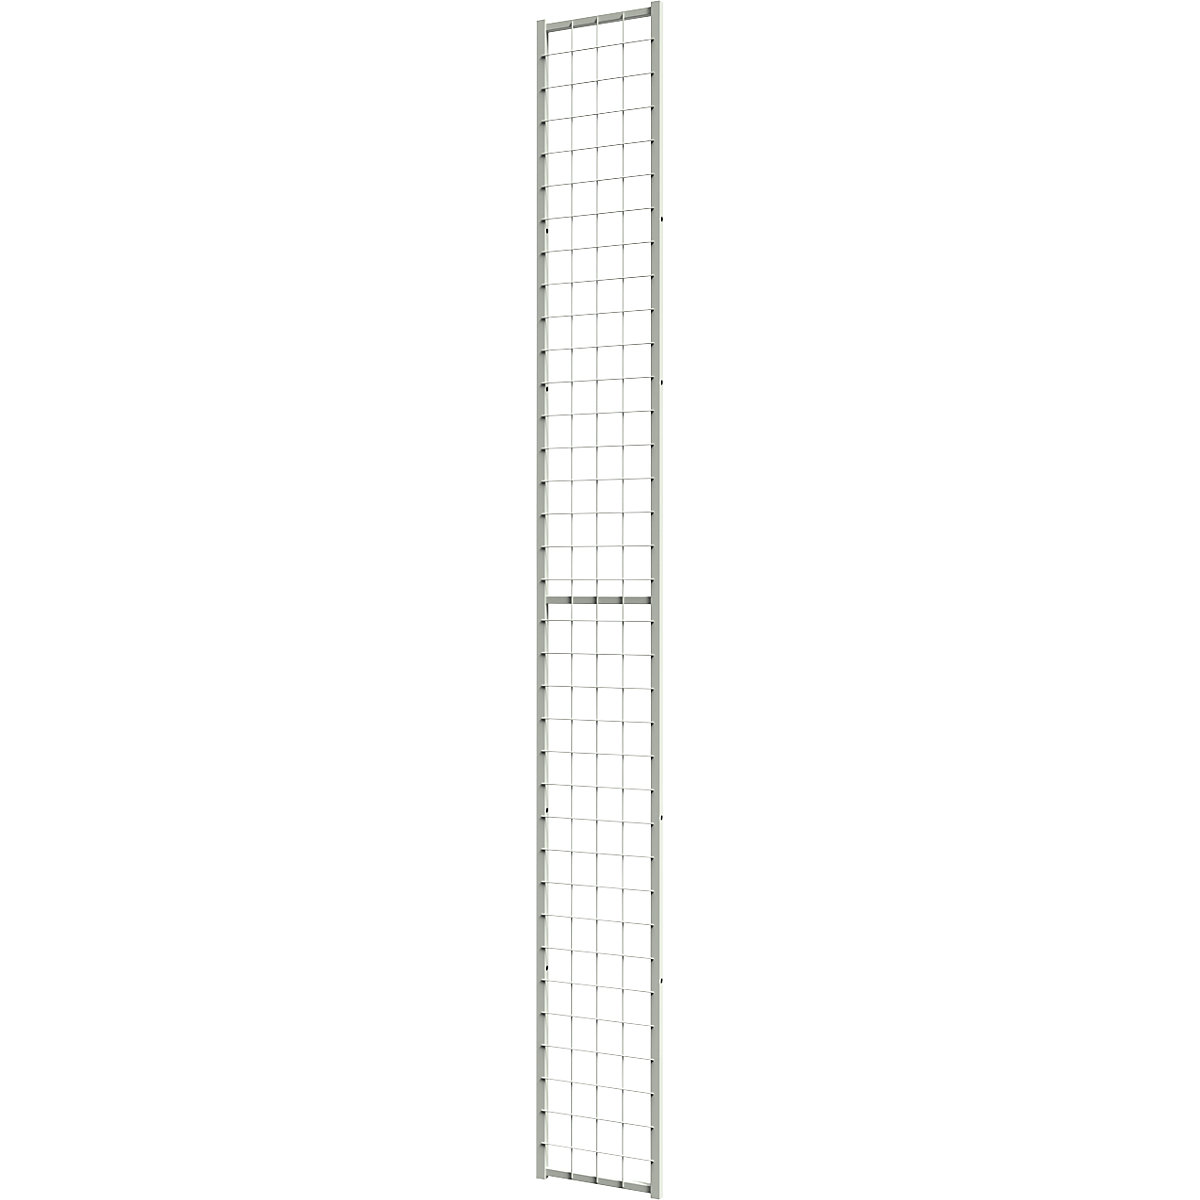 X-STORE 2.0 partition system, wall section - Axelent